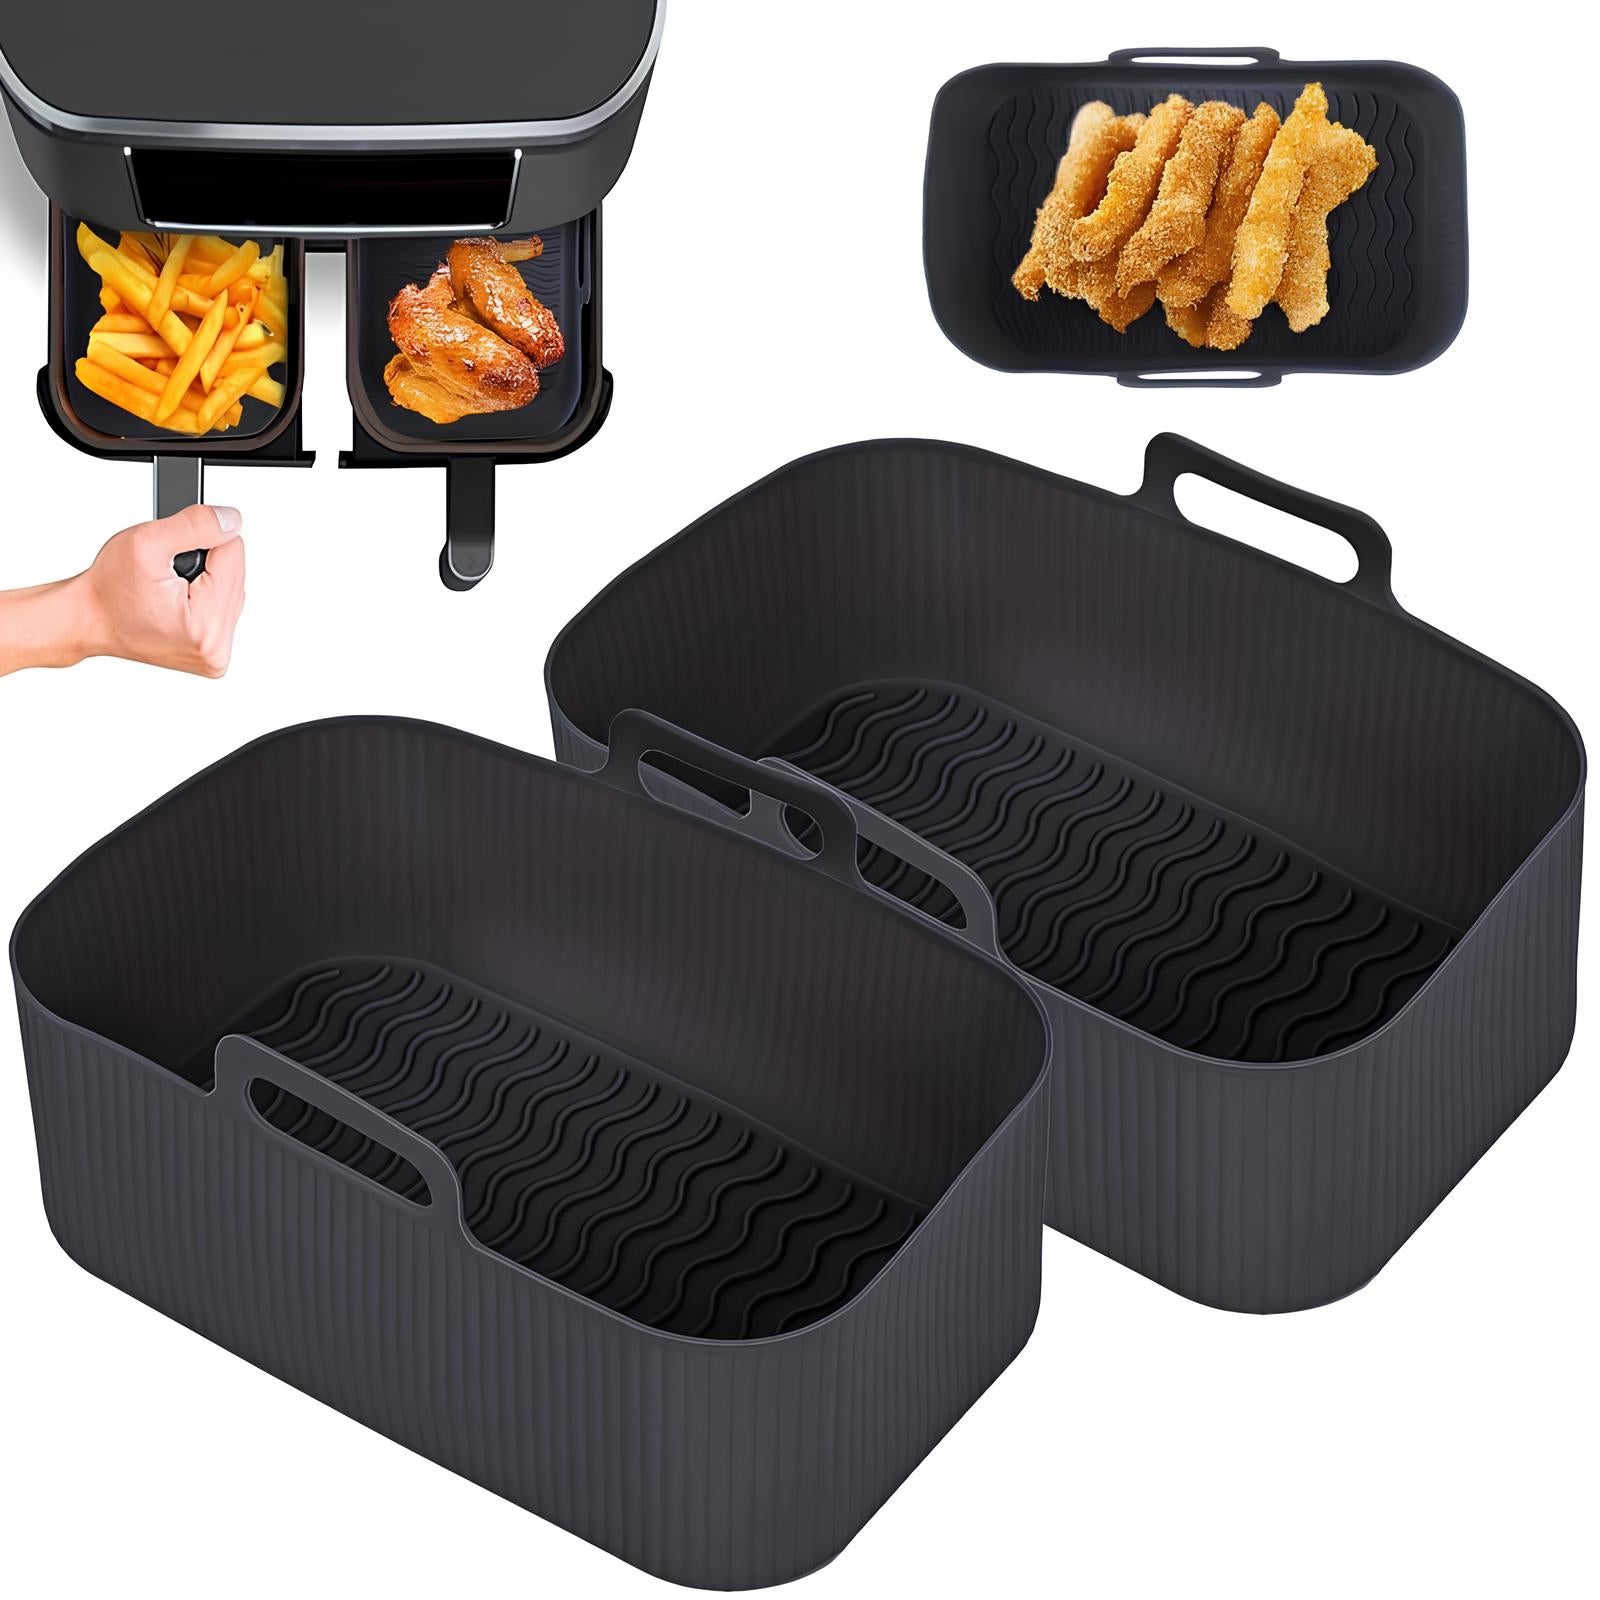 Moule rectangulaire en silicone pour friteuse à air - Airfryer - UstensilesCulinaires